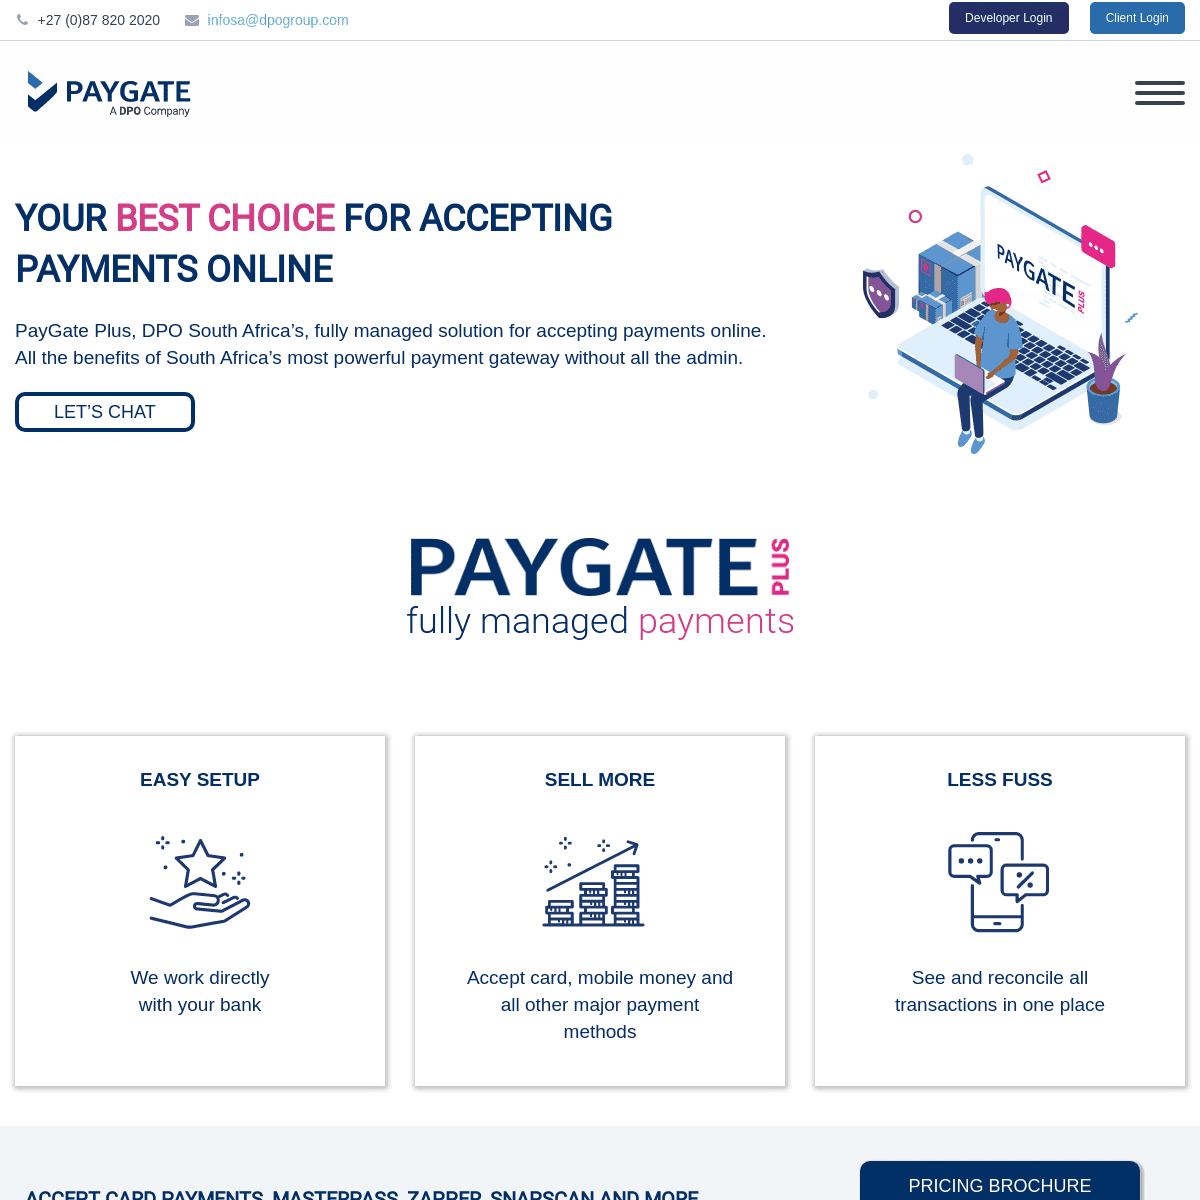 A complete backup of https://paygate.co.za